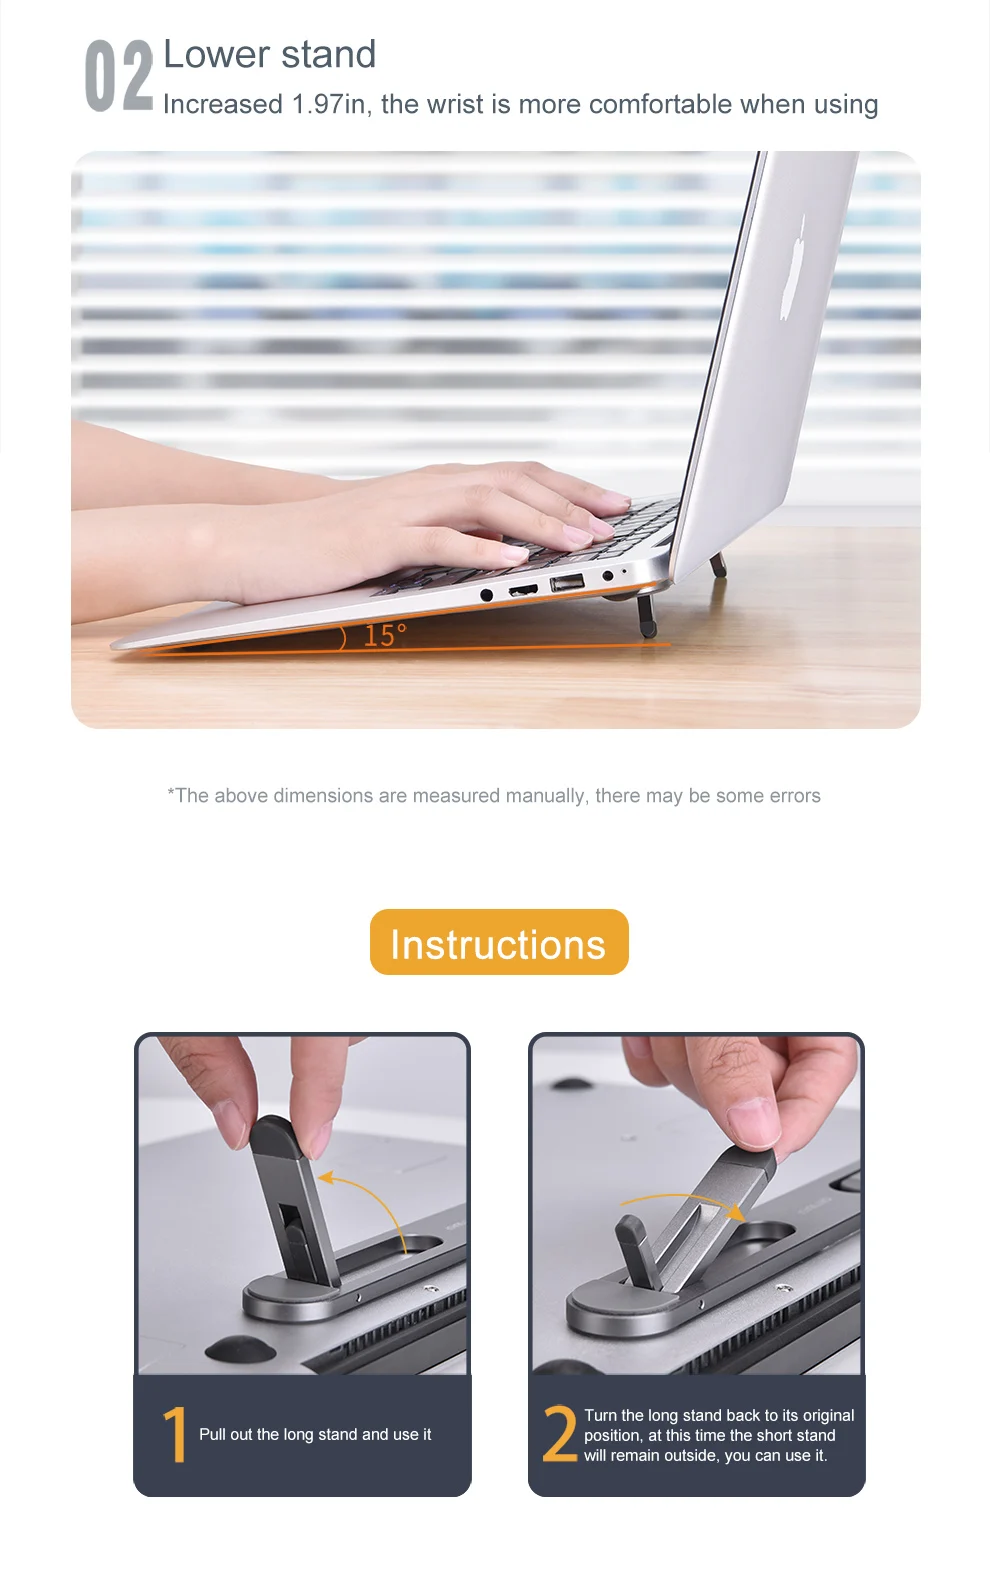 Oatsbasf Laptop stand suporte notebook tablet accessories macbook pro stand Mini Foldable laptop Portable holder Cooling stand